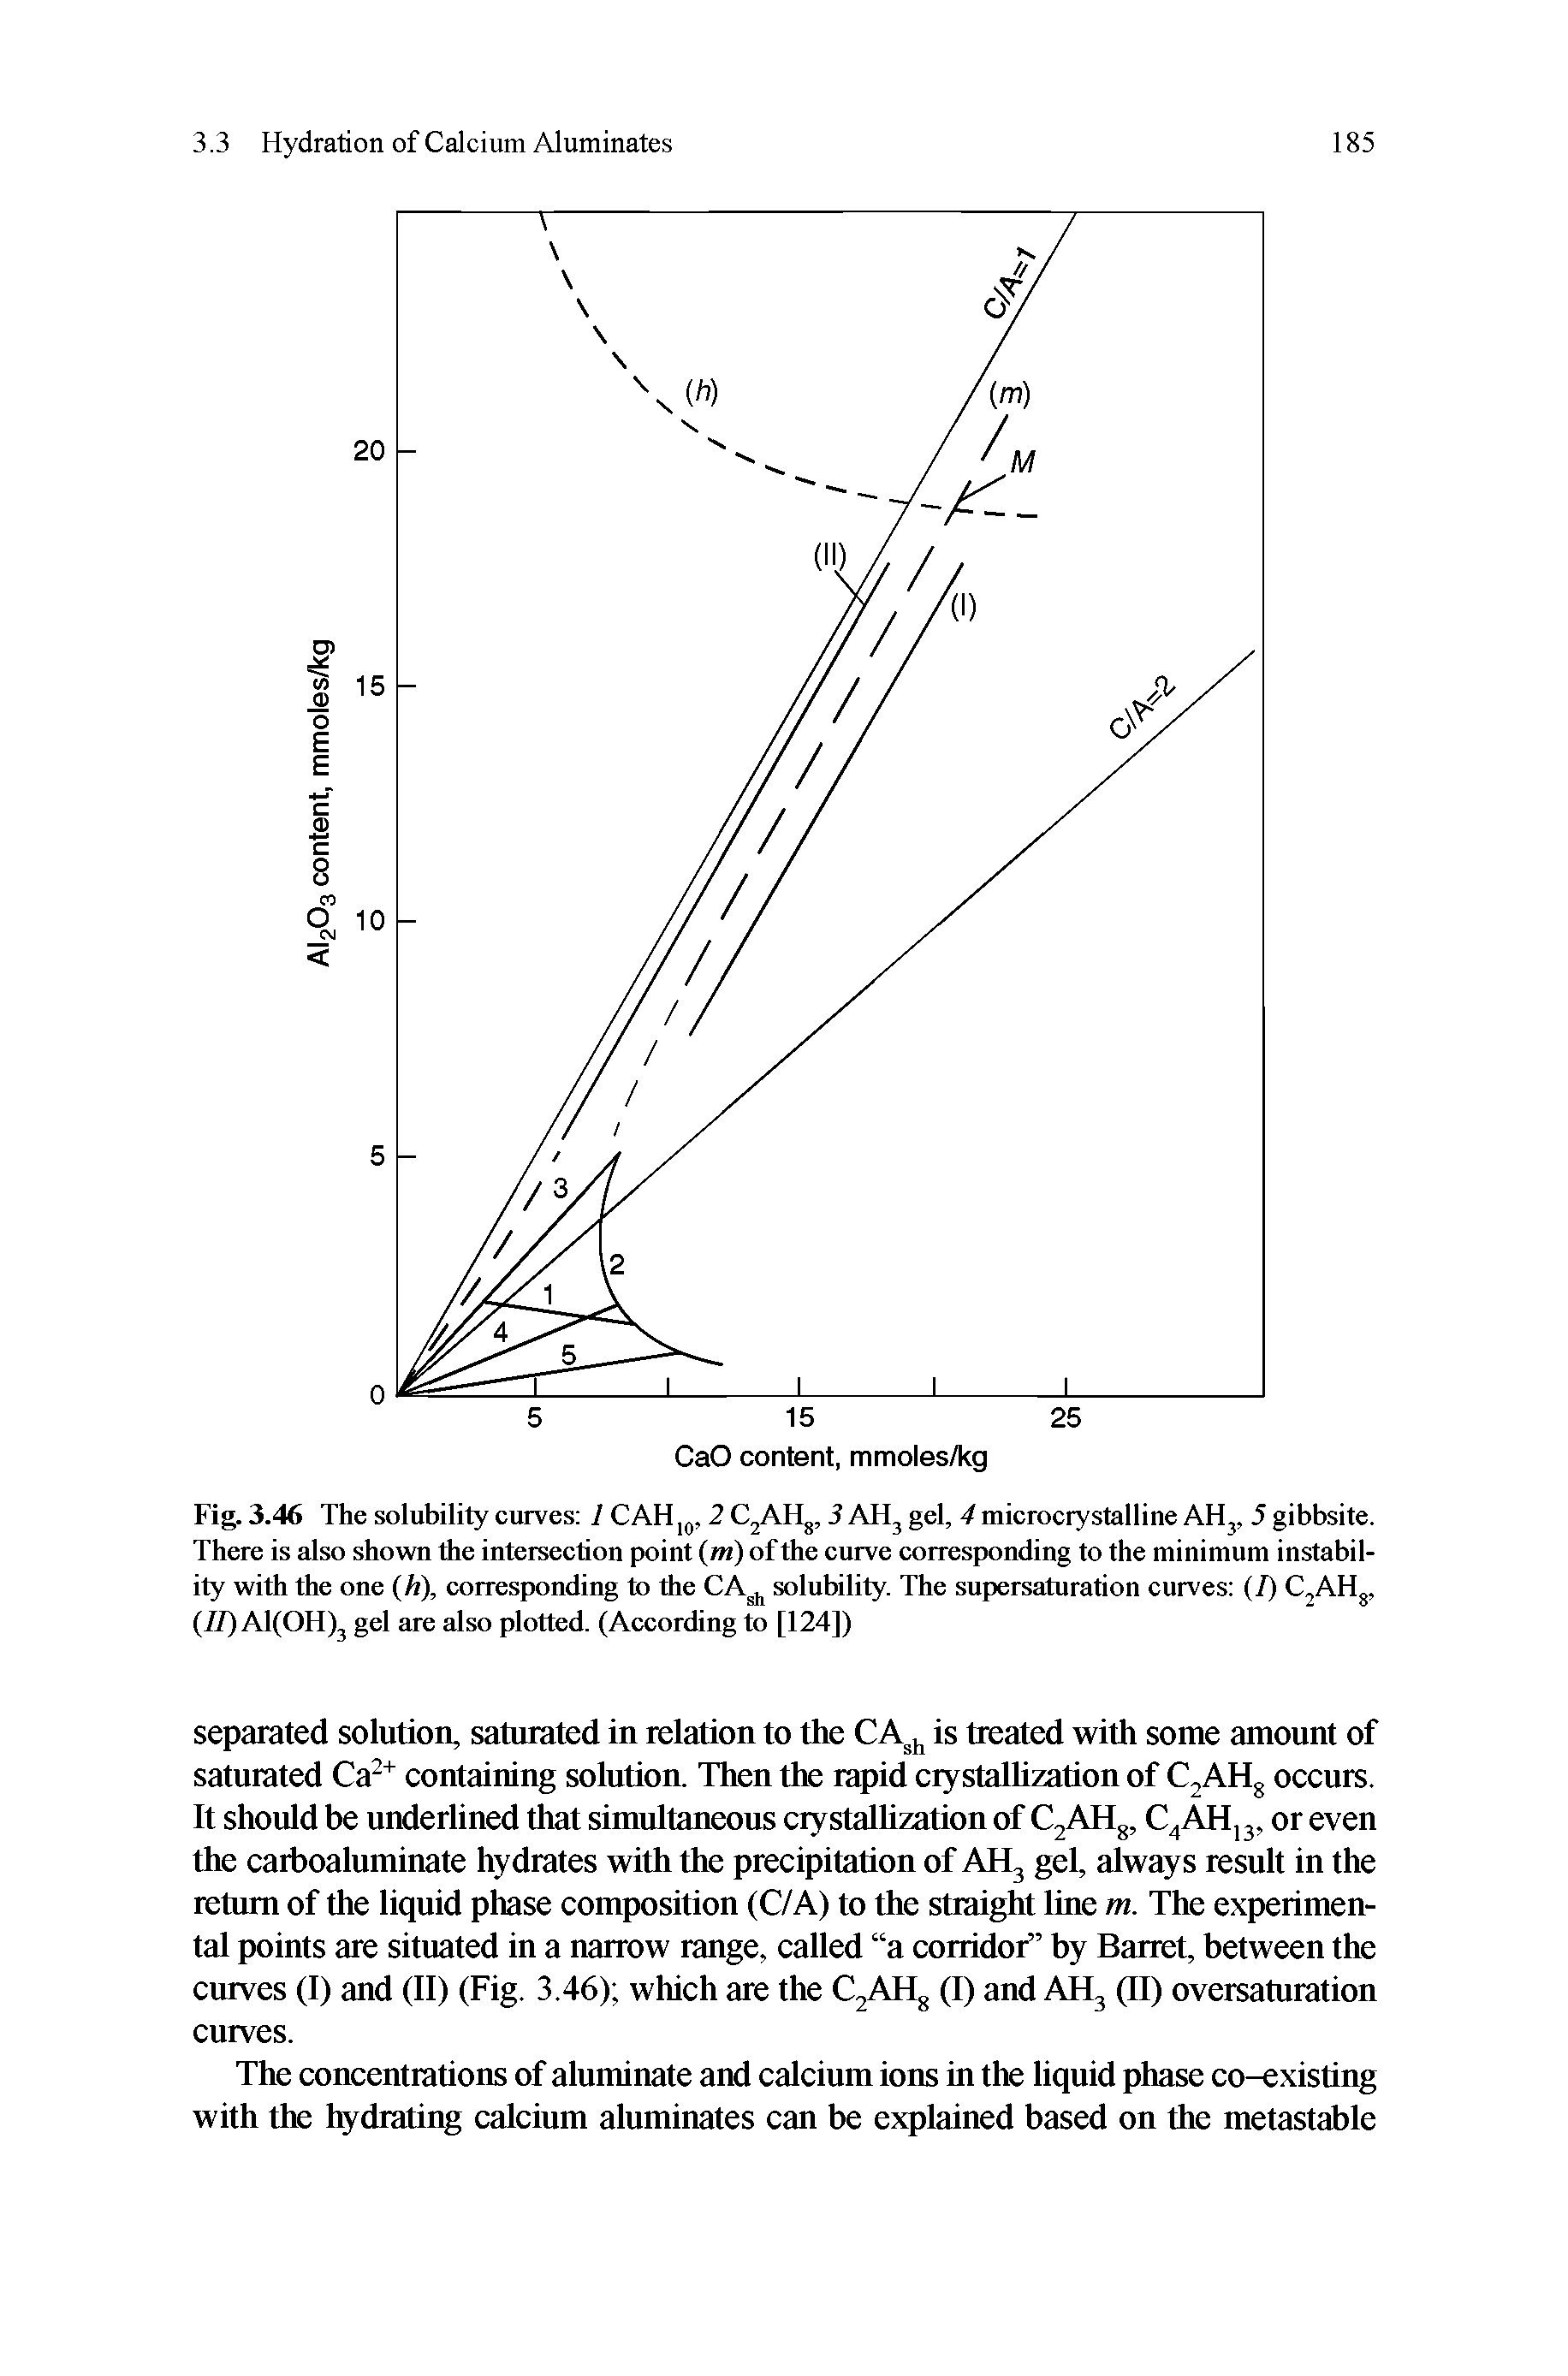 Fig. 3.46 The solubility curves 1 CAH, 2 C AHj, 3 AHj gel, 4 microcrystalline AHj, 5 gibbsite. There is also shown the inteiseclion point (iw) of the curve corresponding to the minimum instability with the one (A), corresponding to the CA solubility. The supersaturation curves (7) CjAHj, (77) Al(OH)j gel are also plotted. (According to [124])...